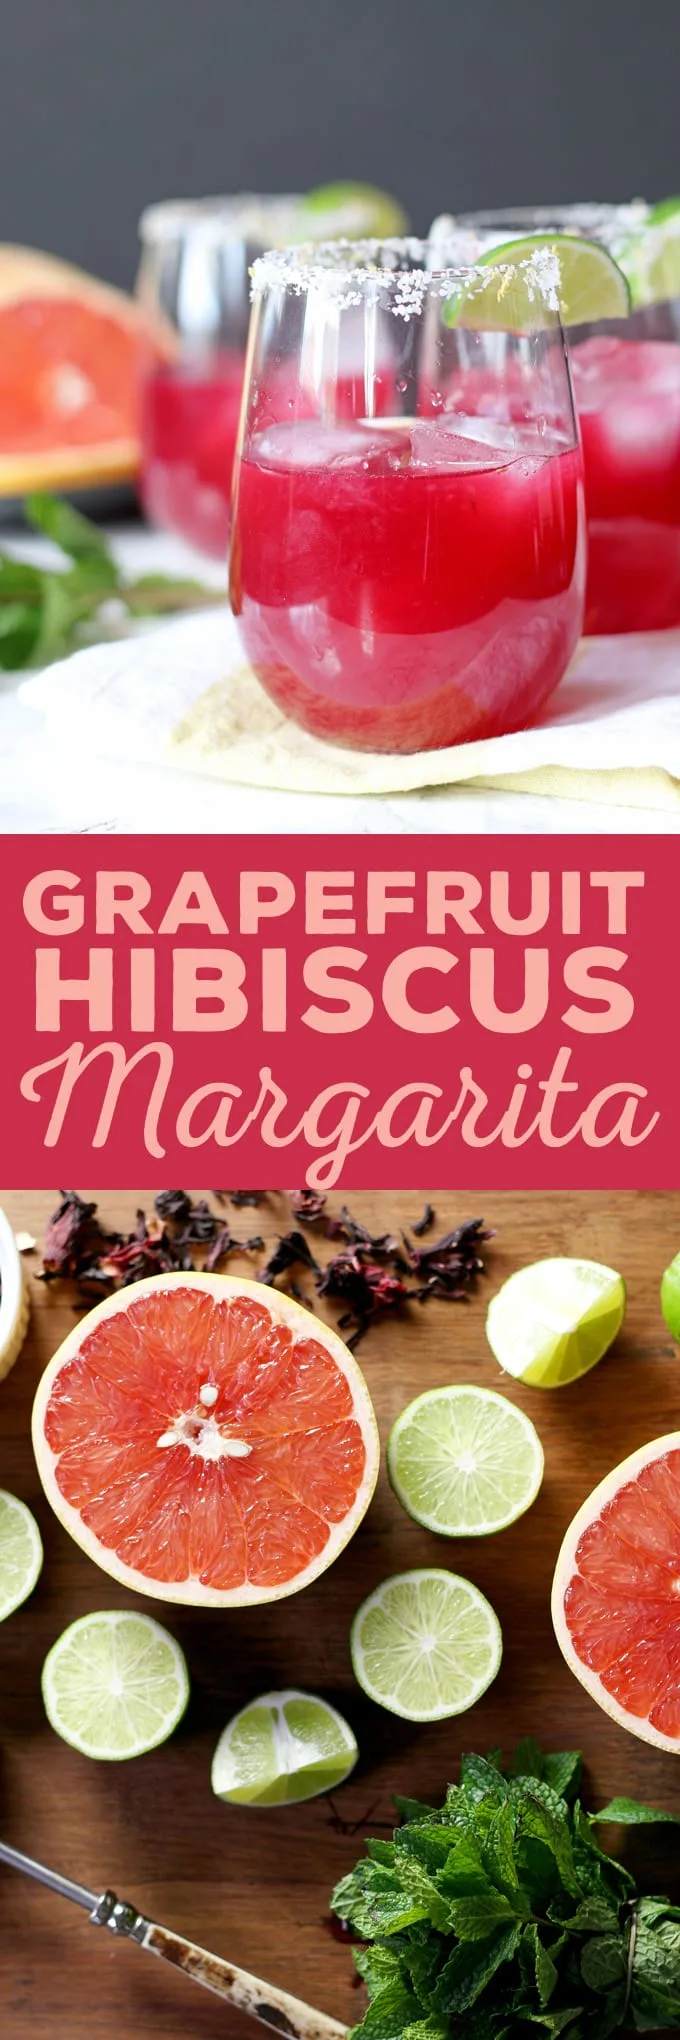 This grapefruit hibiscus margarita is the perfect cocktail recipe to make you think of summer! Fresh grapefruit and lime juice, homemade hibiscus simple syrup and a little muddled mint make this a fun and tropical cocktail! | honeyandbirch.com